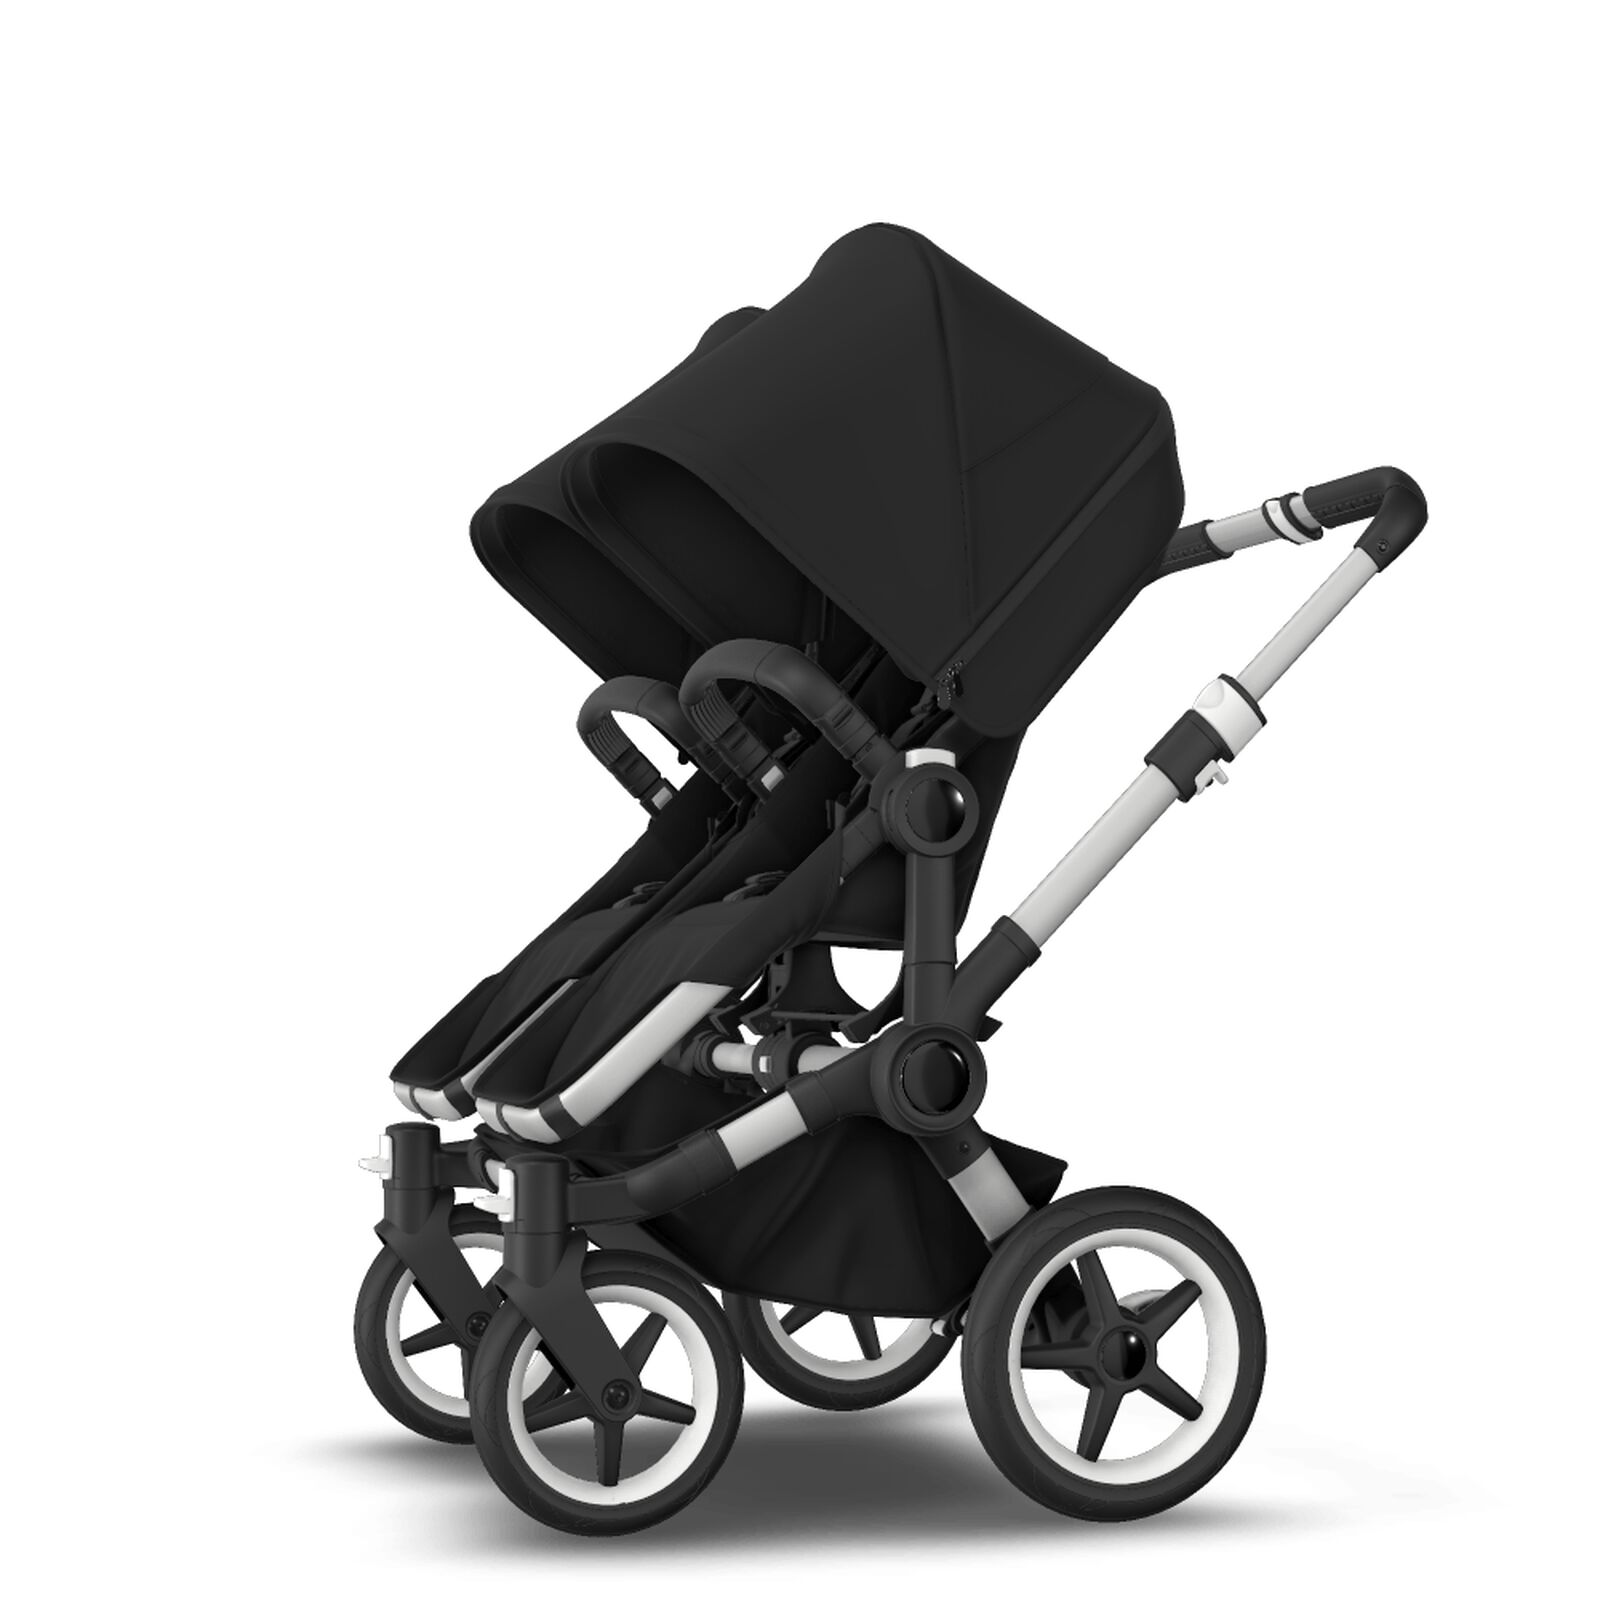 Bugaboo Donkey 3 Twin travel system - View 15